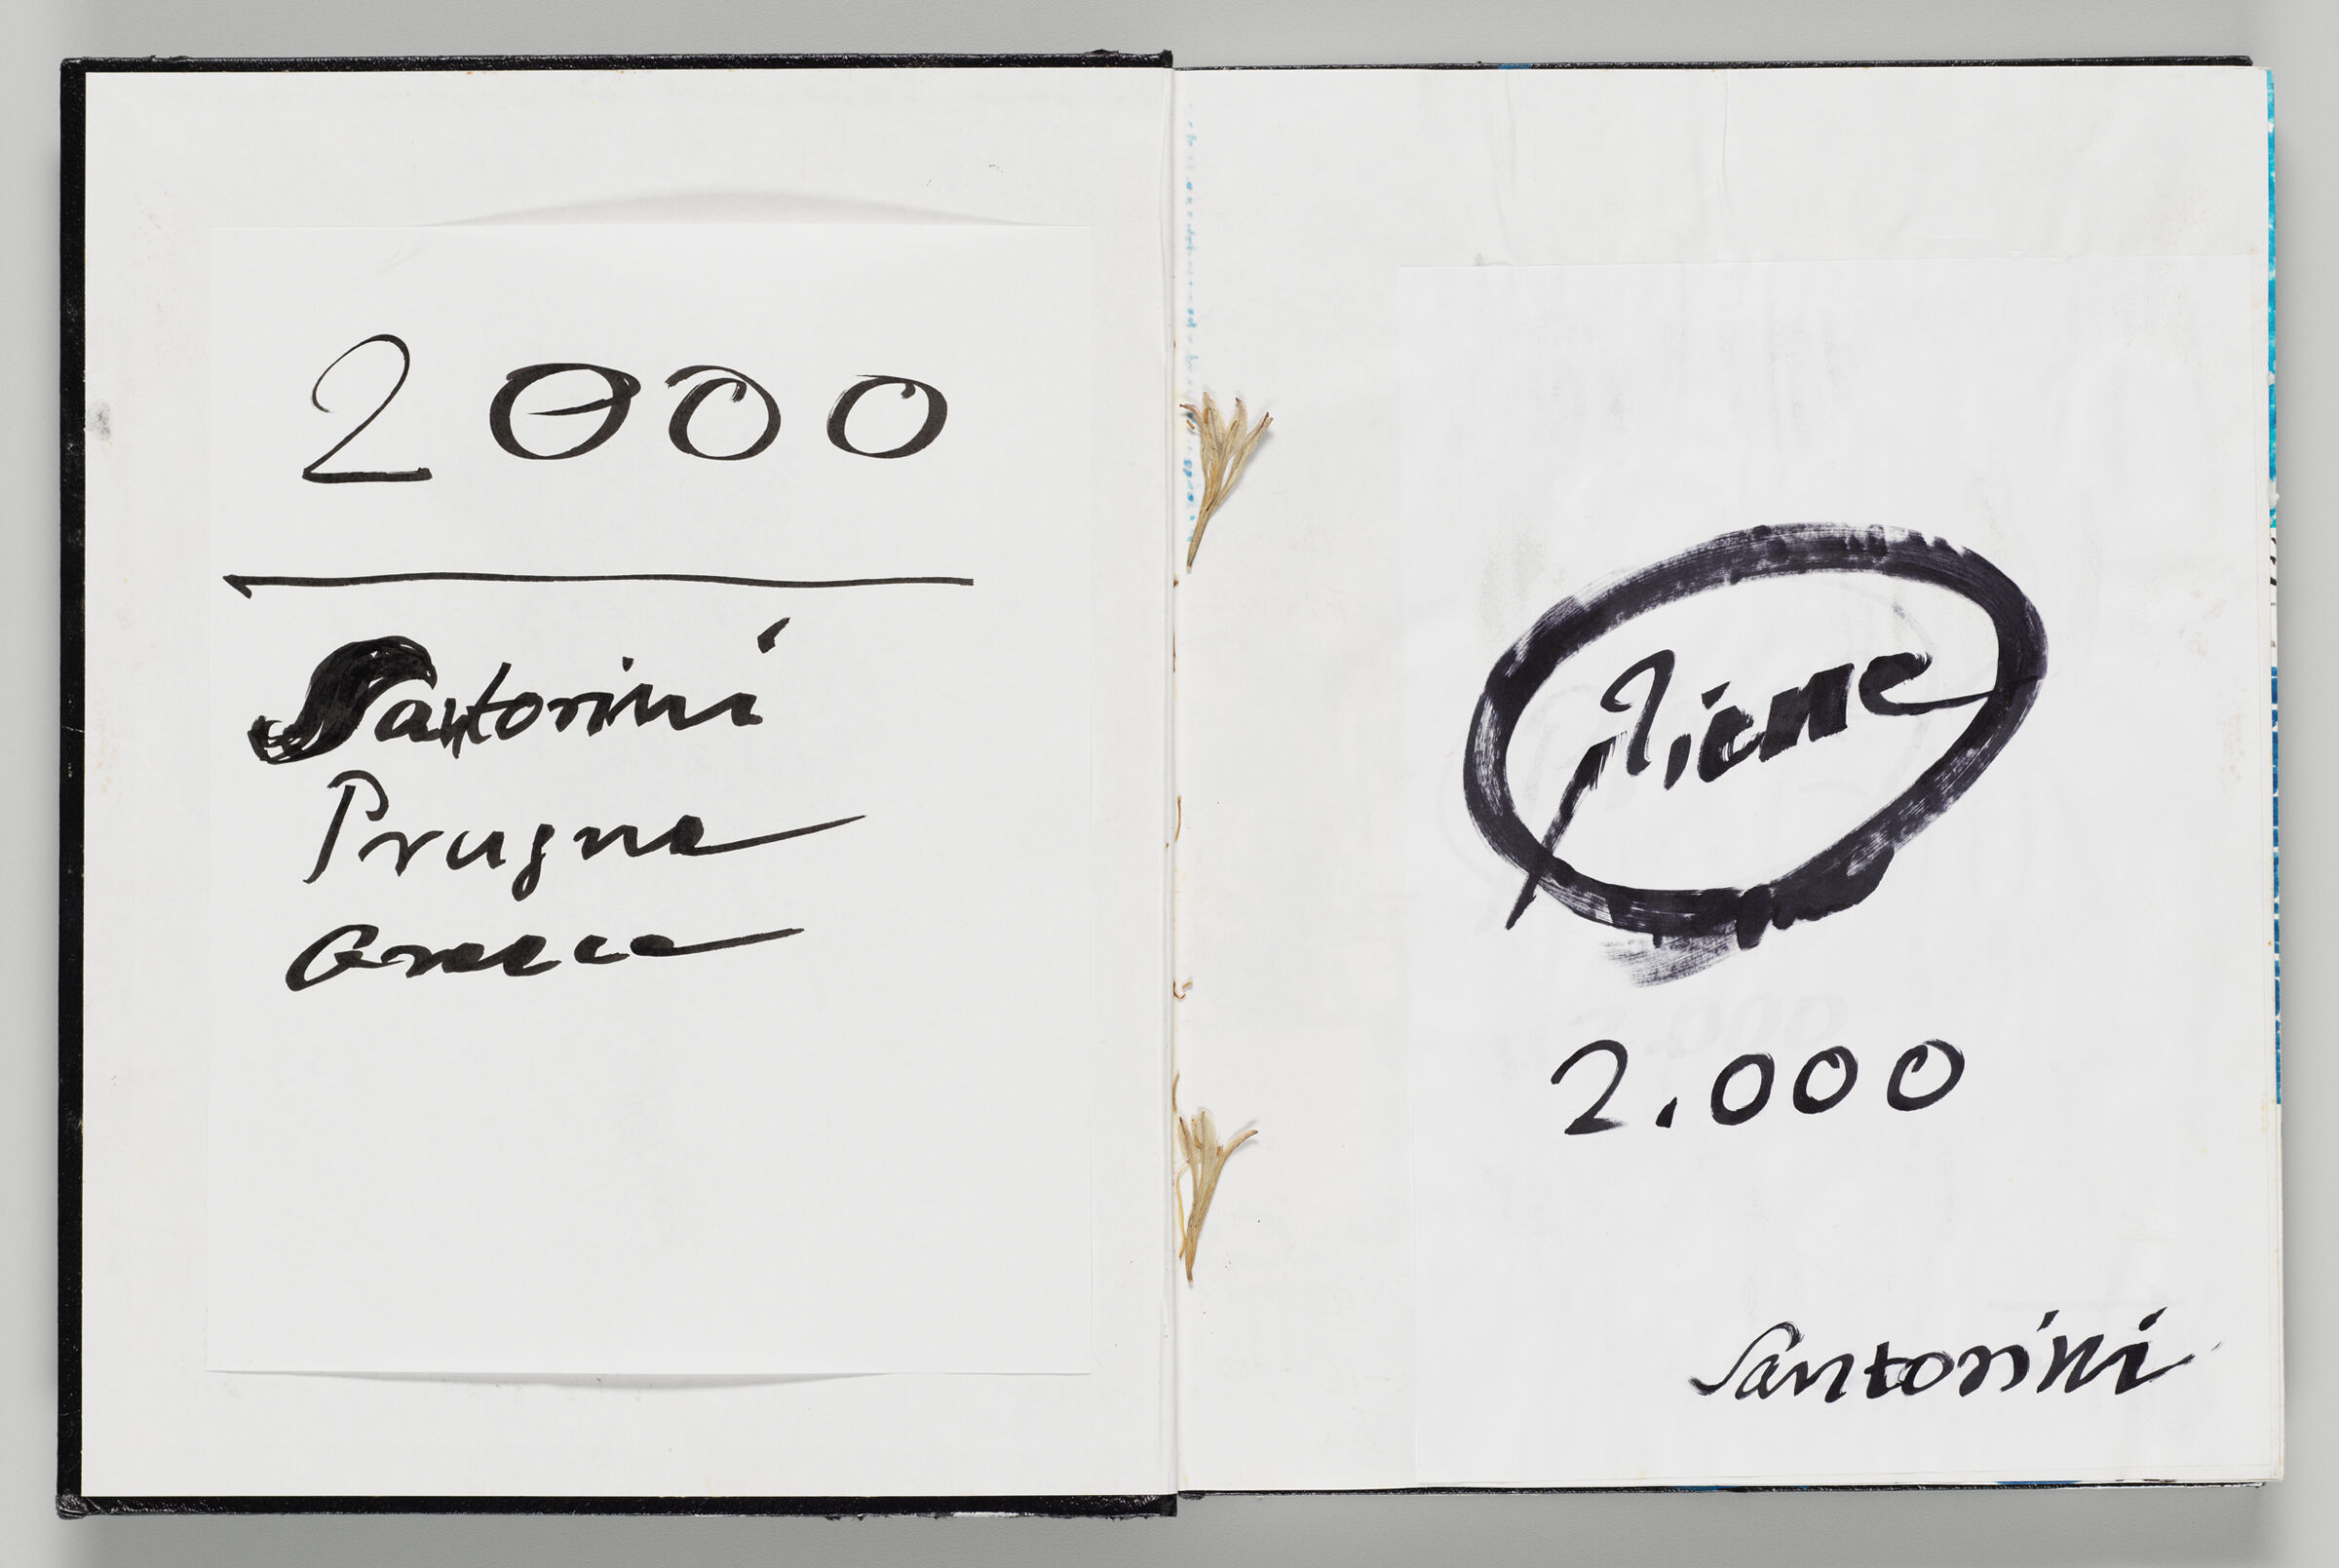 Untitled (Front Endpaper With Color Transfer Of Signature, Left Page); Untitled (Adhered Signature Page, Right Page)